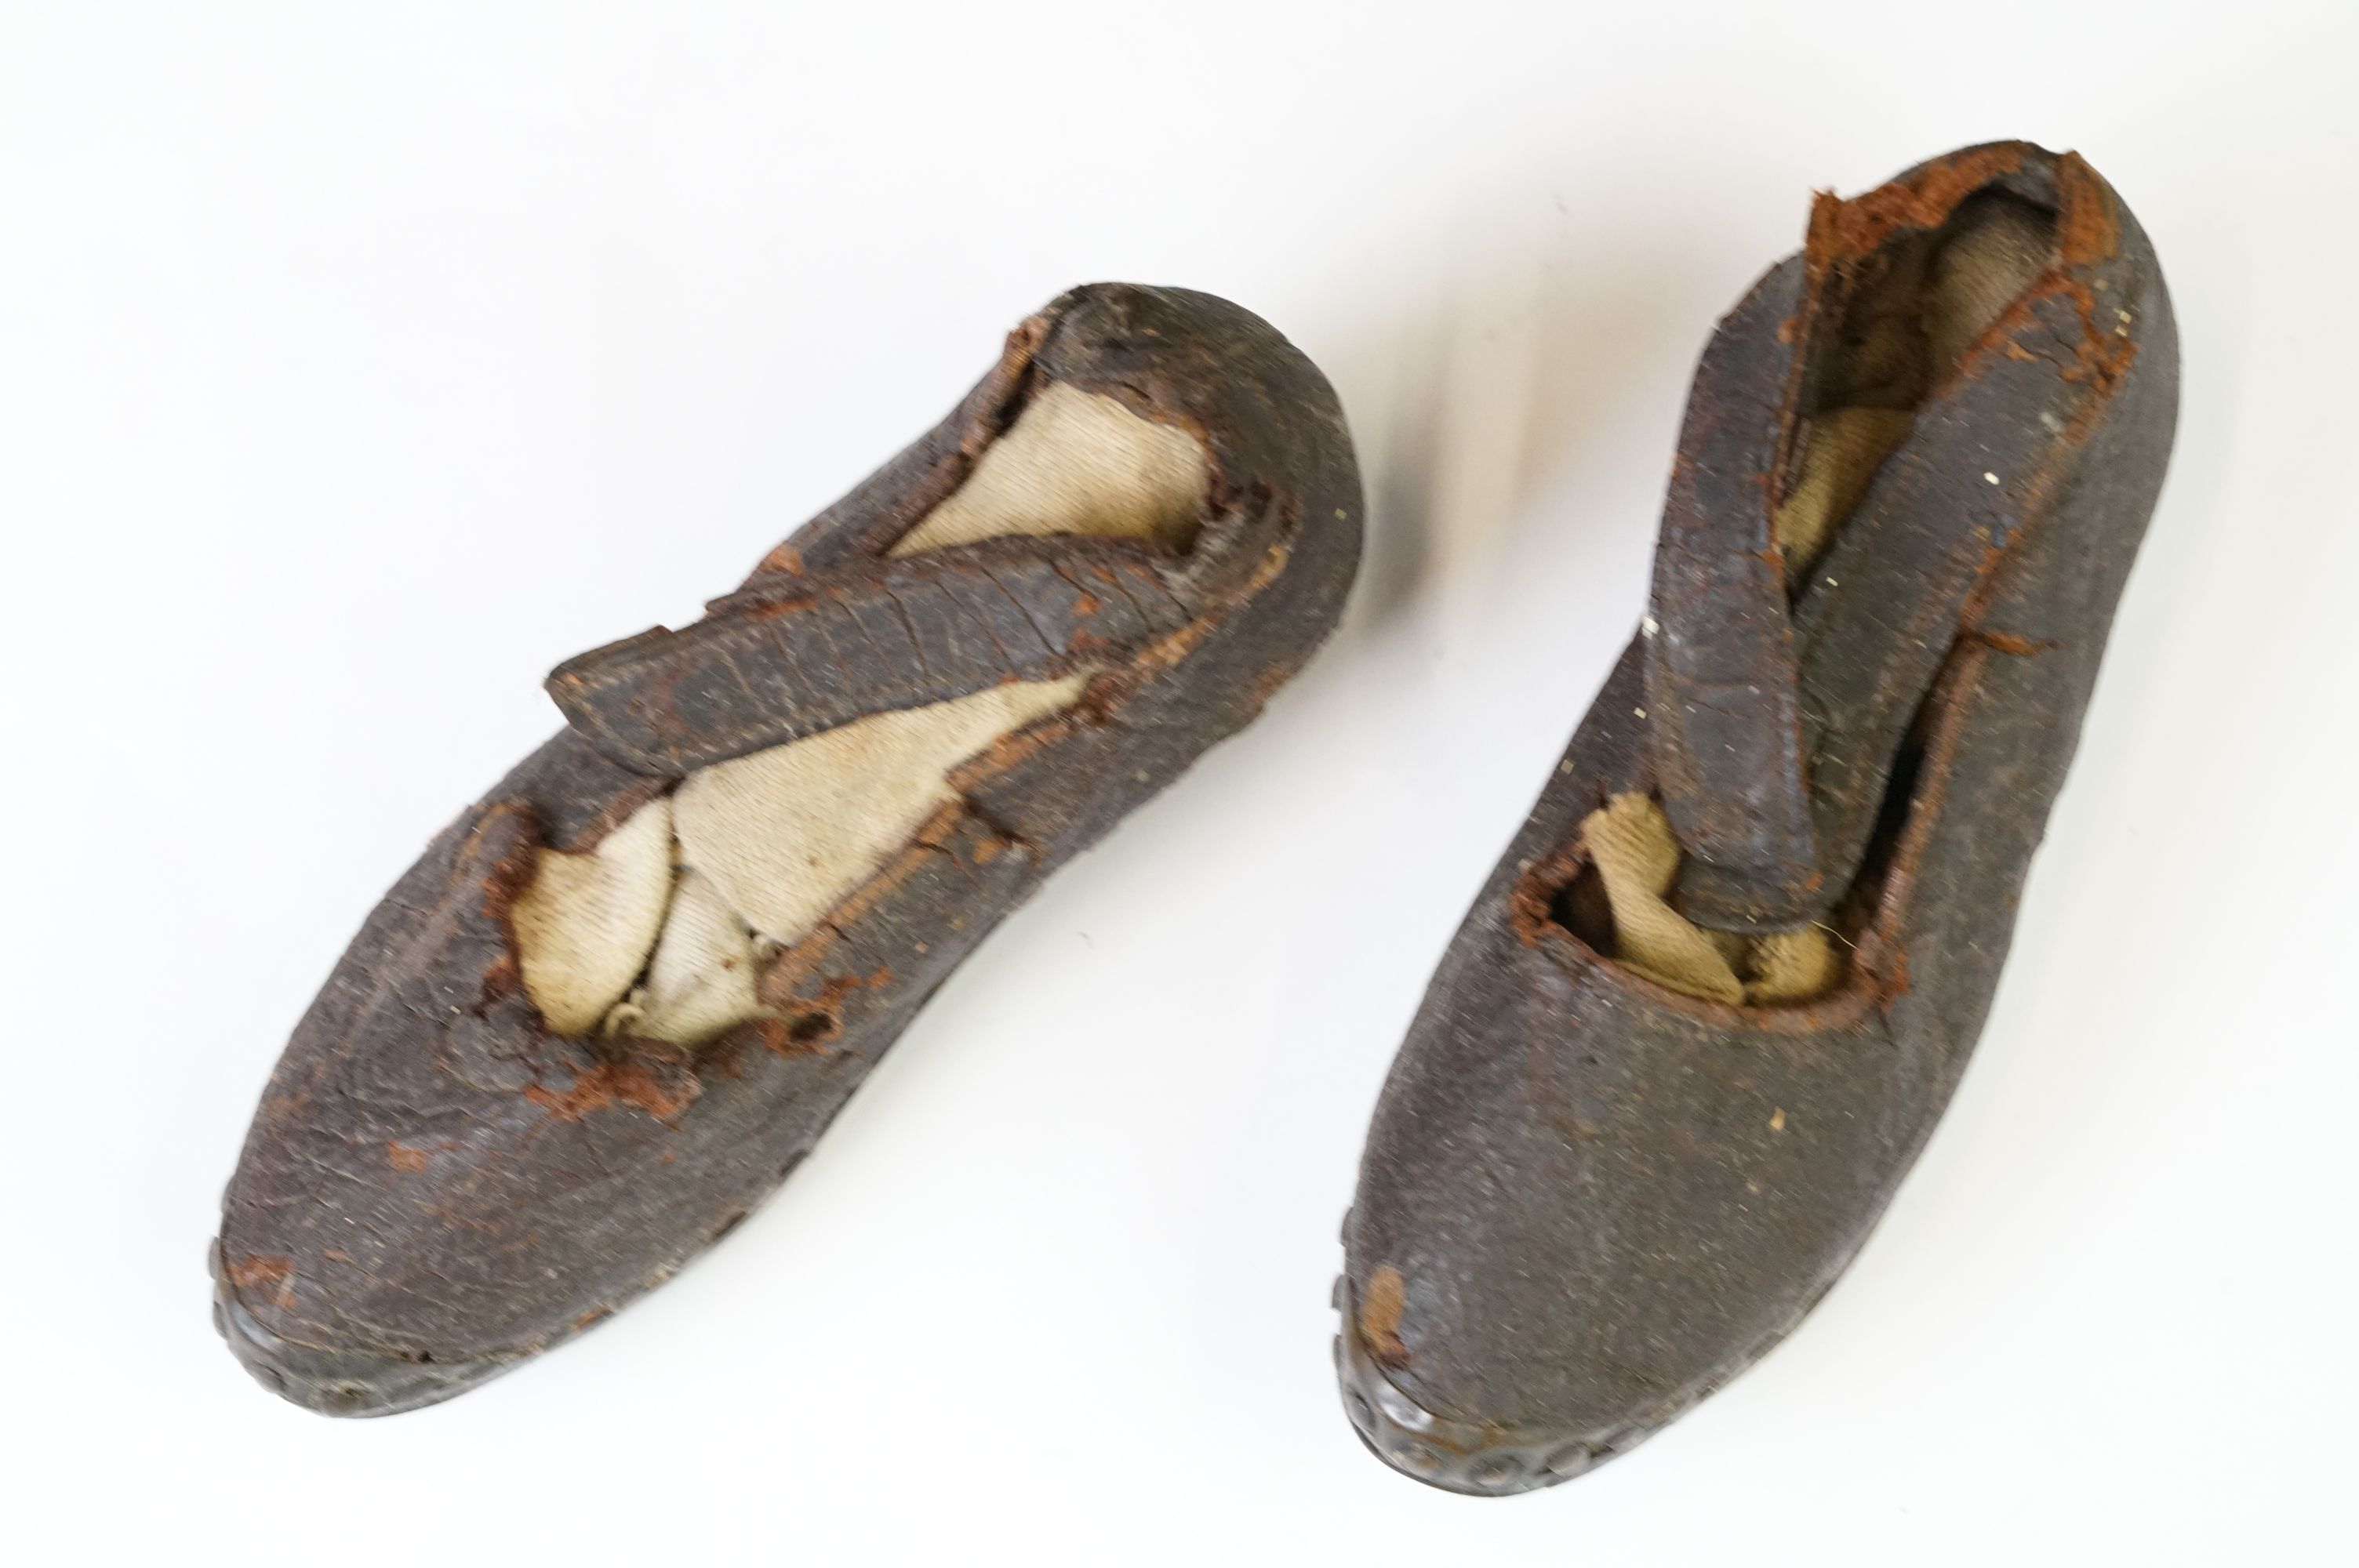 A pair of 'Latchet' leather Childs shoes c.1650-1700 - Image 2 of 10